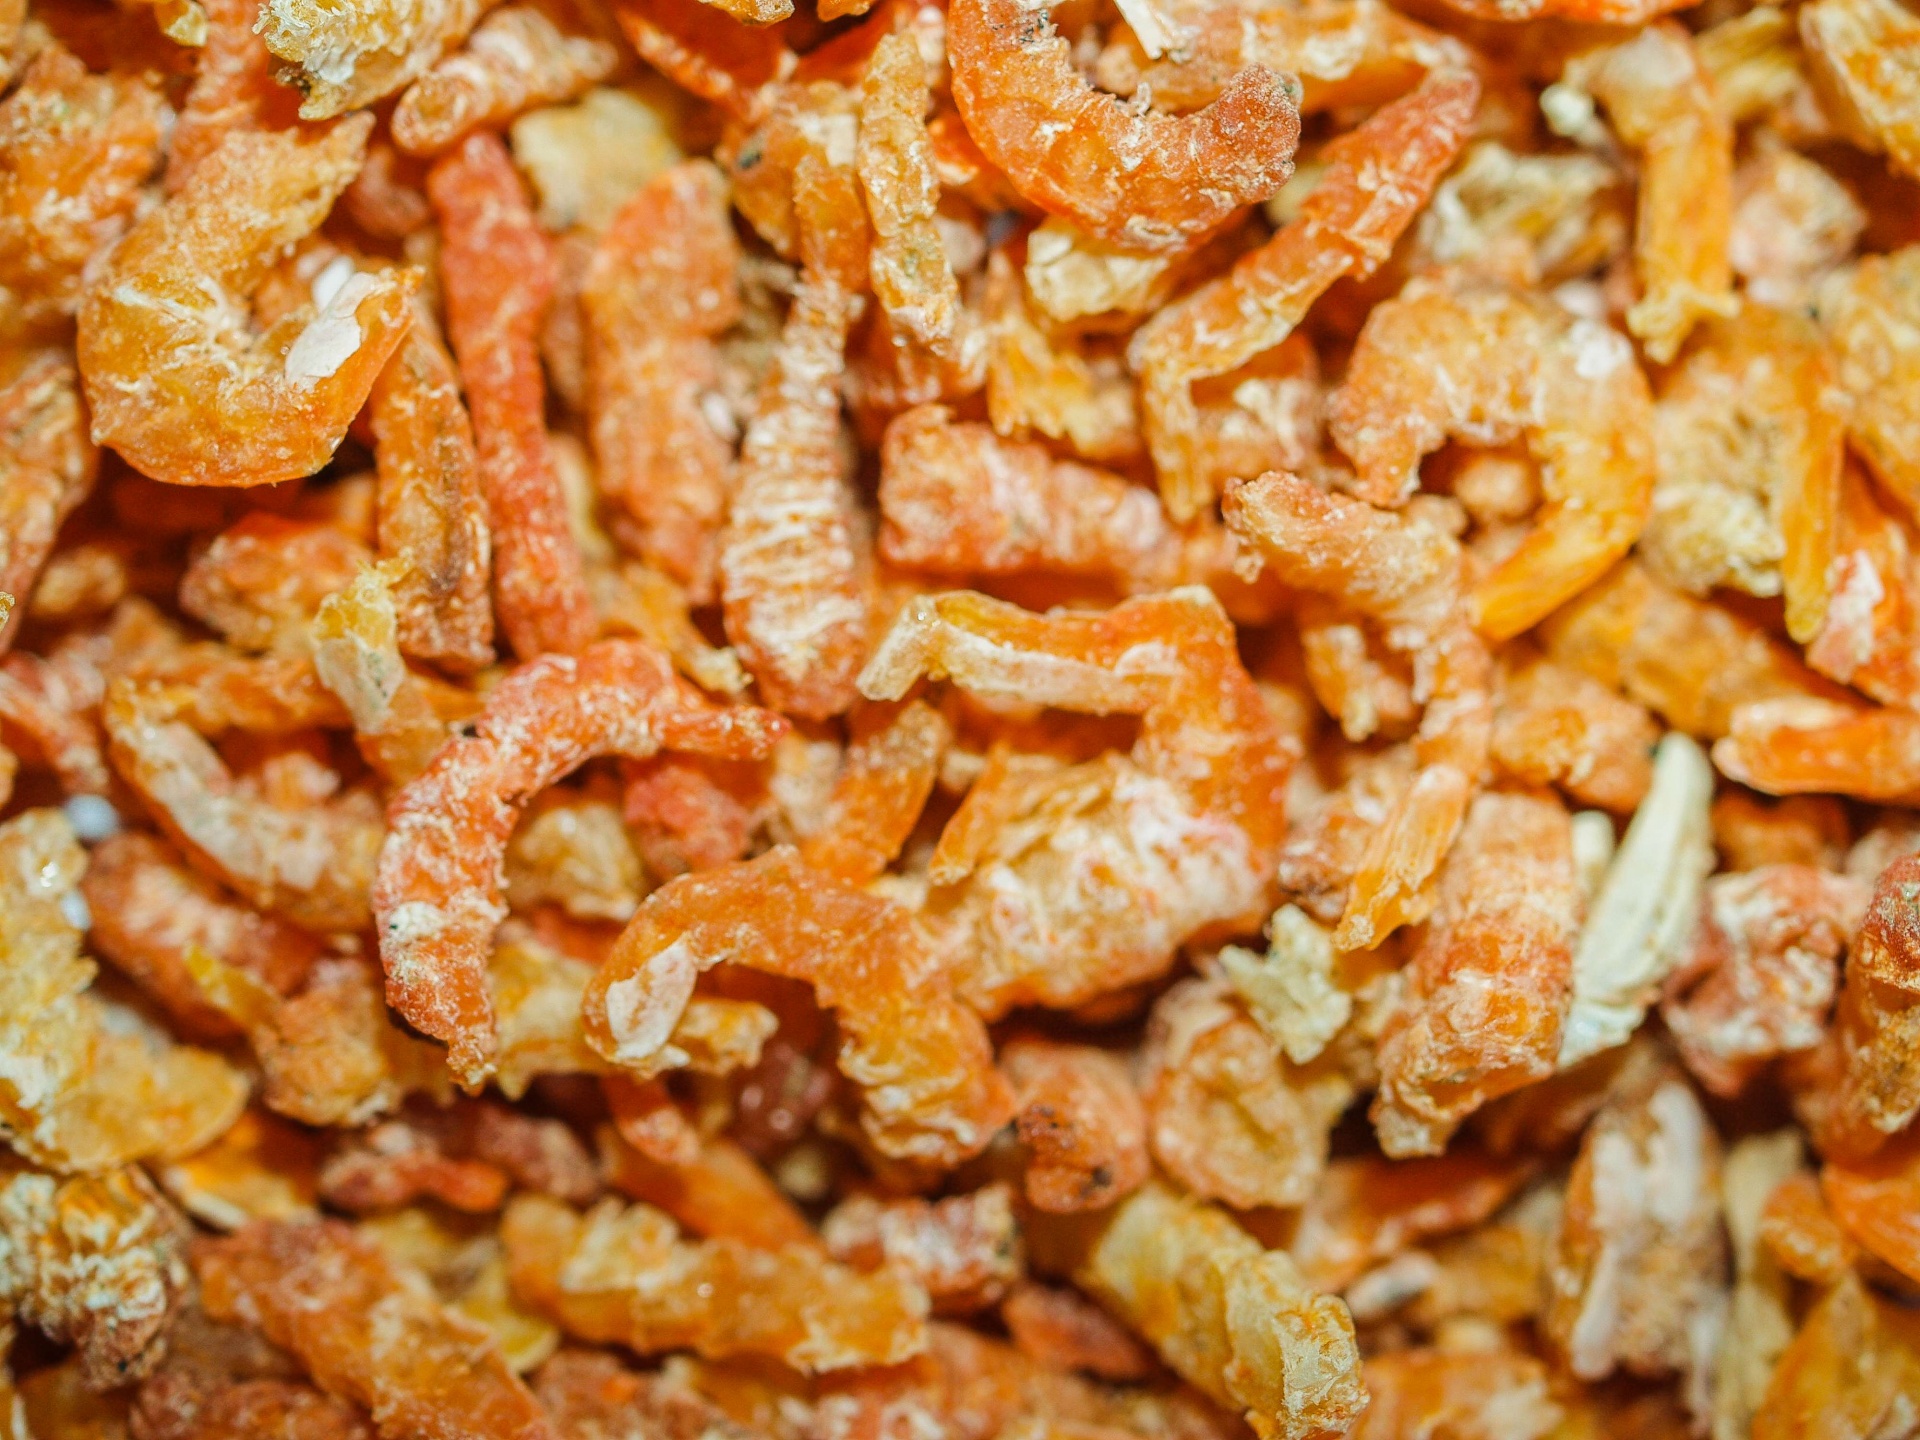 Dry Shrimp With White Background